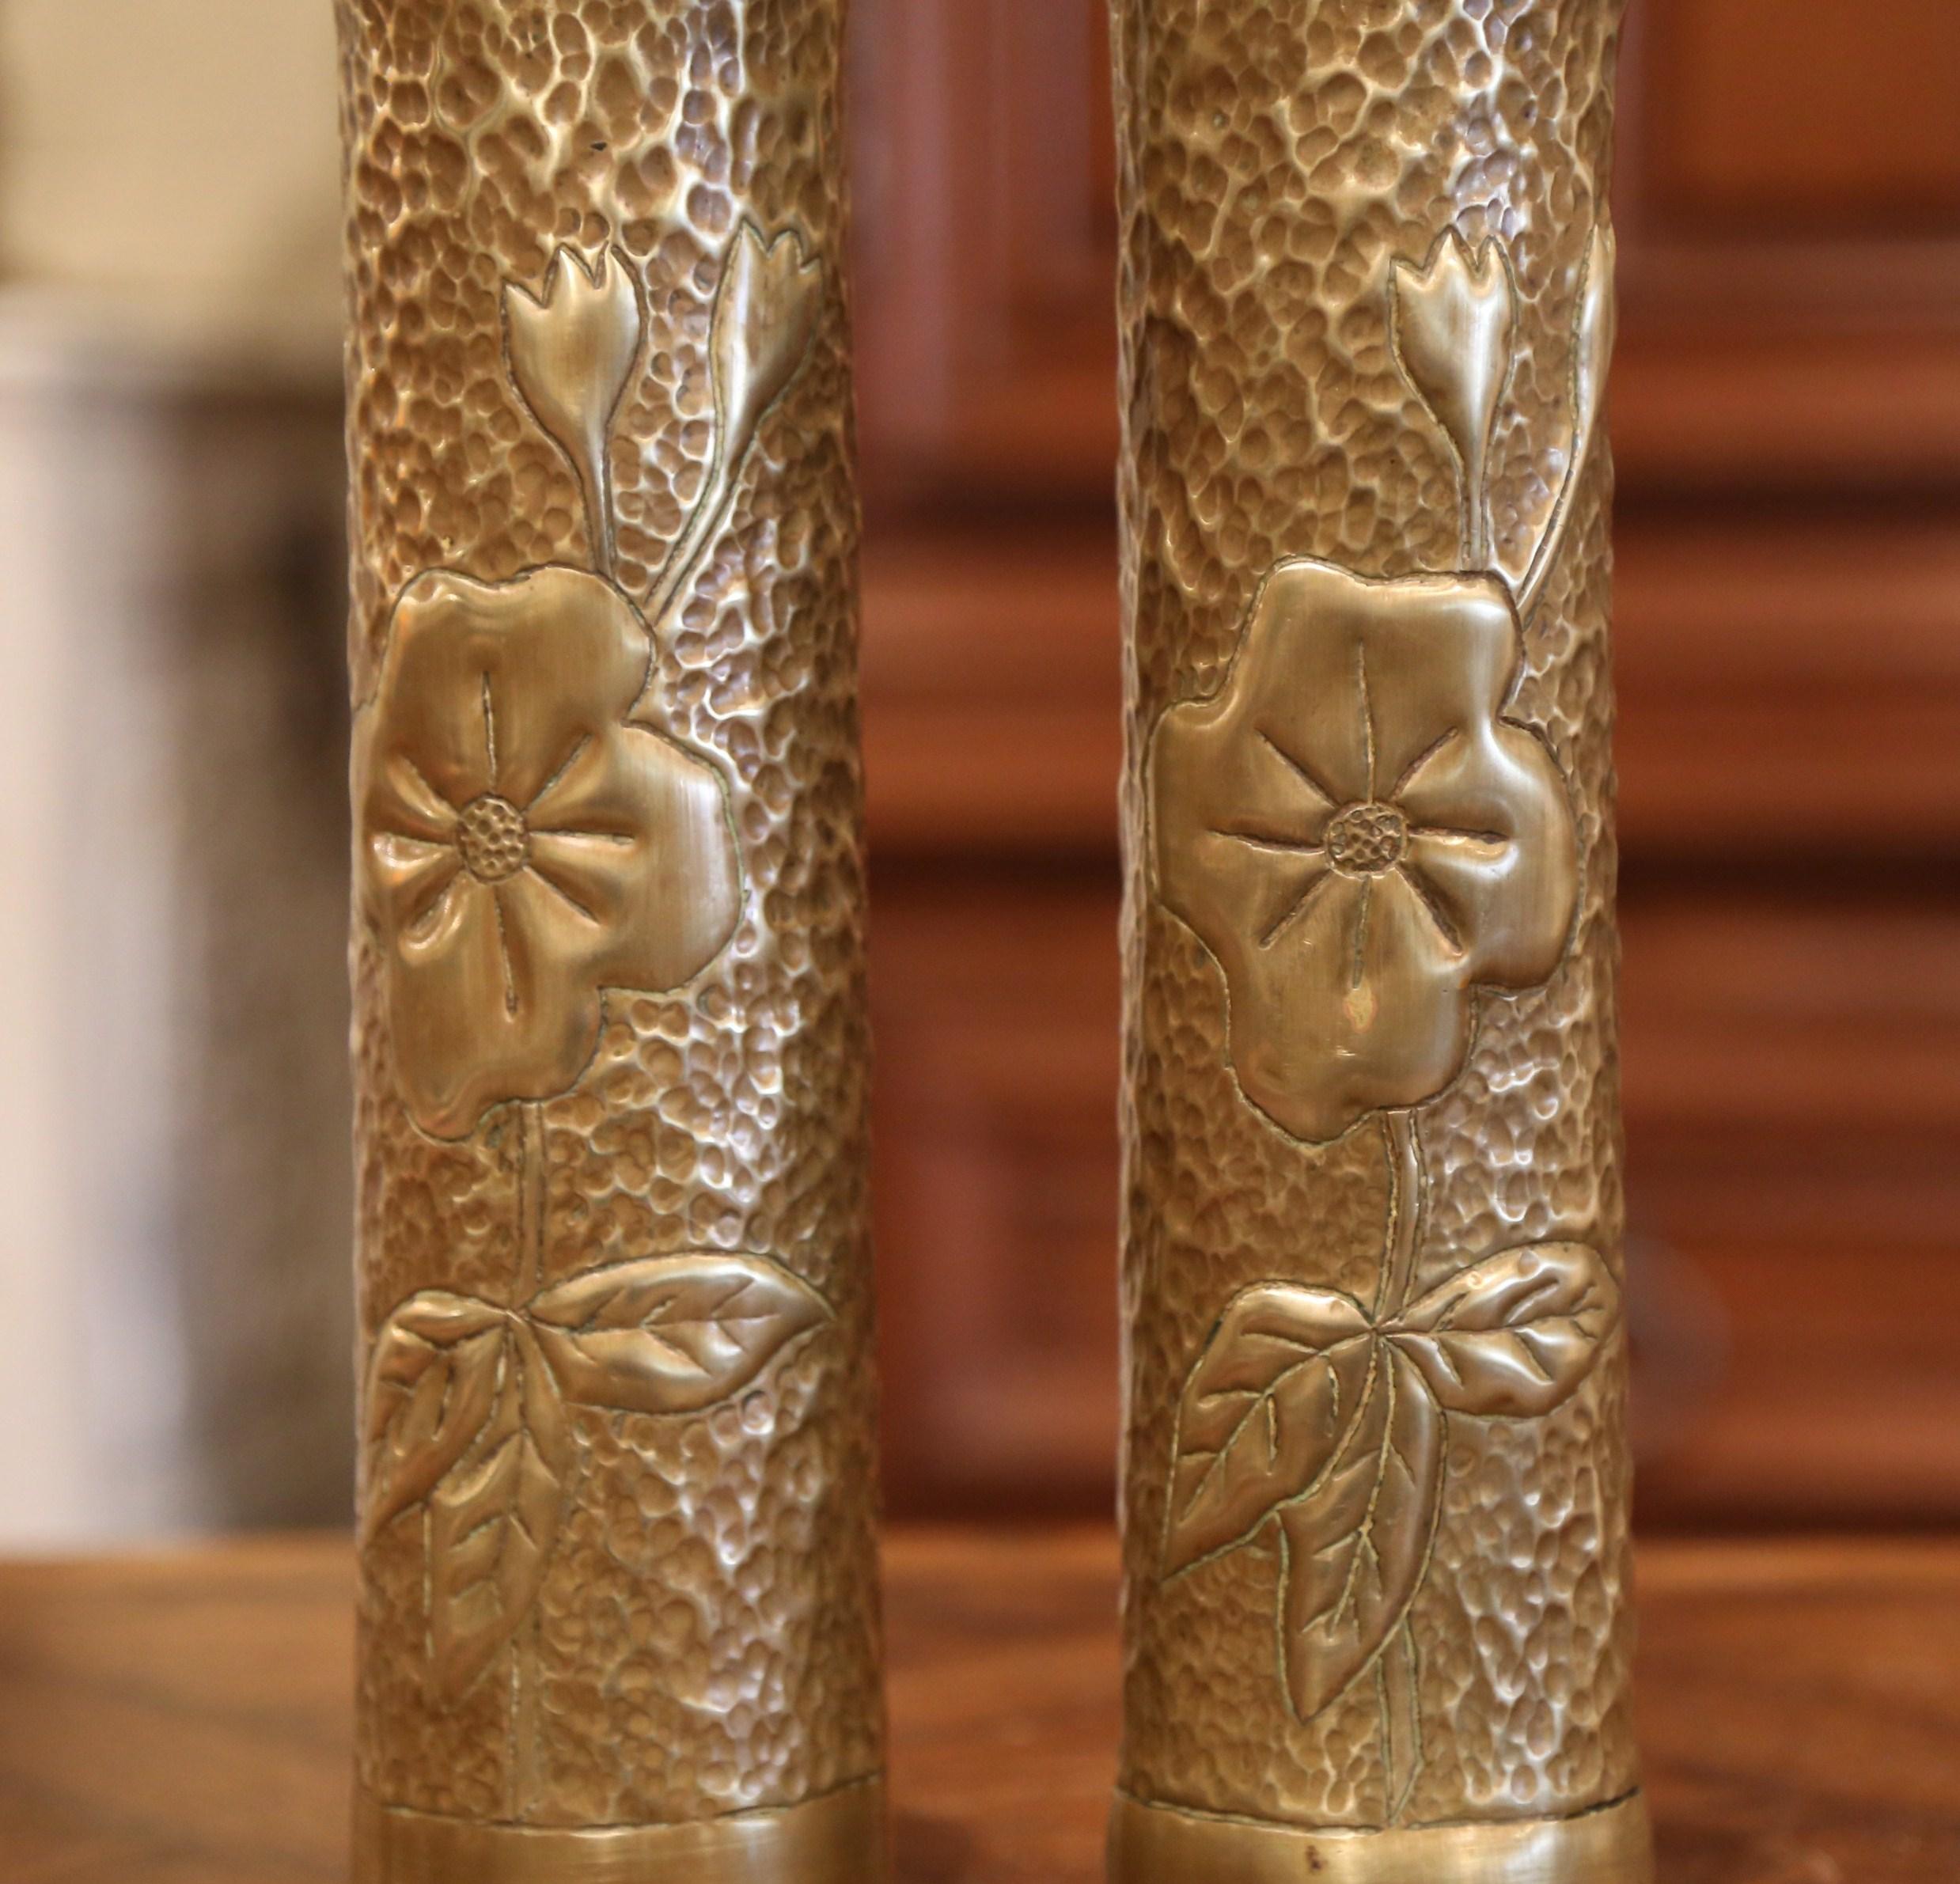 Decorate a table or a shelf with this pair of antique repousse trench art shell vases. Made of brass and dated on the bottom, 1916, the shell casing feature floral and leaf repousse decor. Both WWI pieces are in excellent condition with a rich